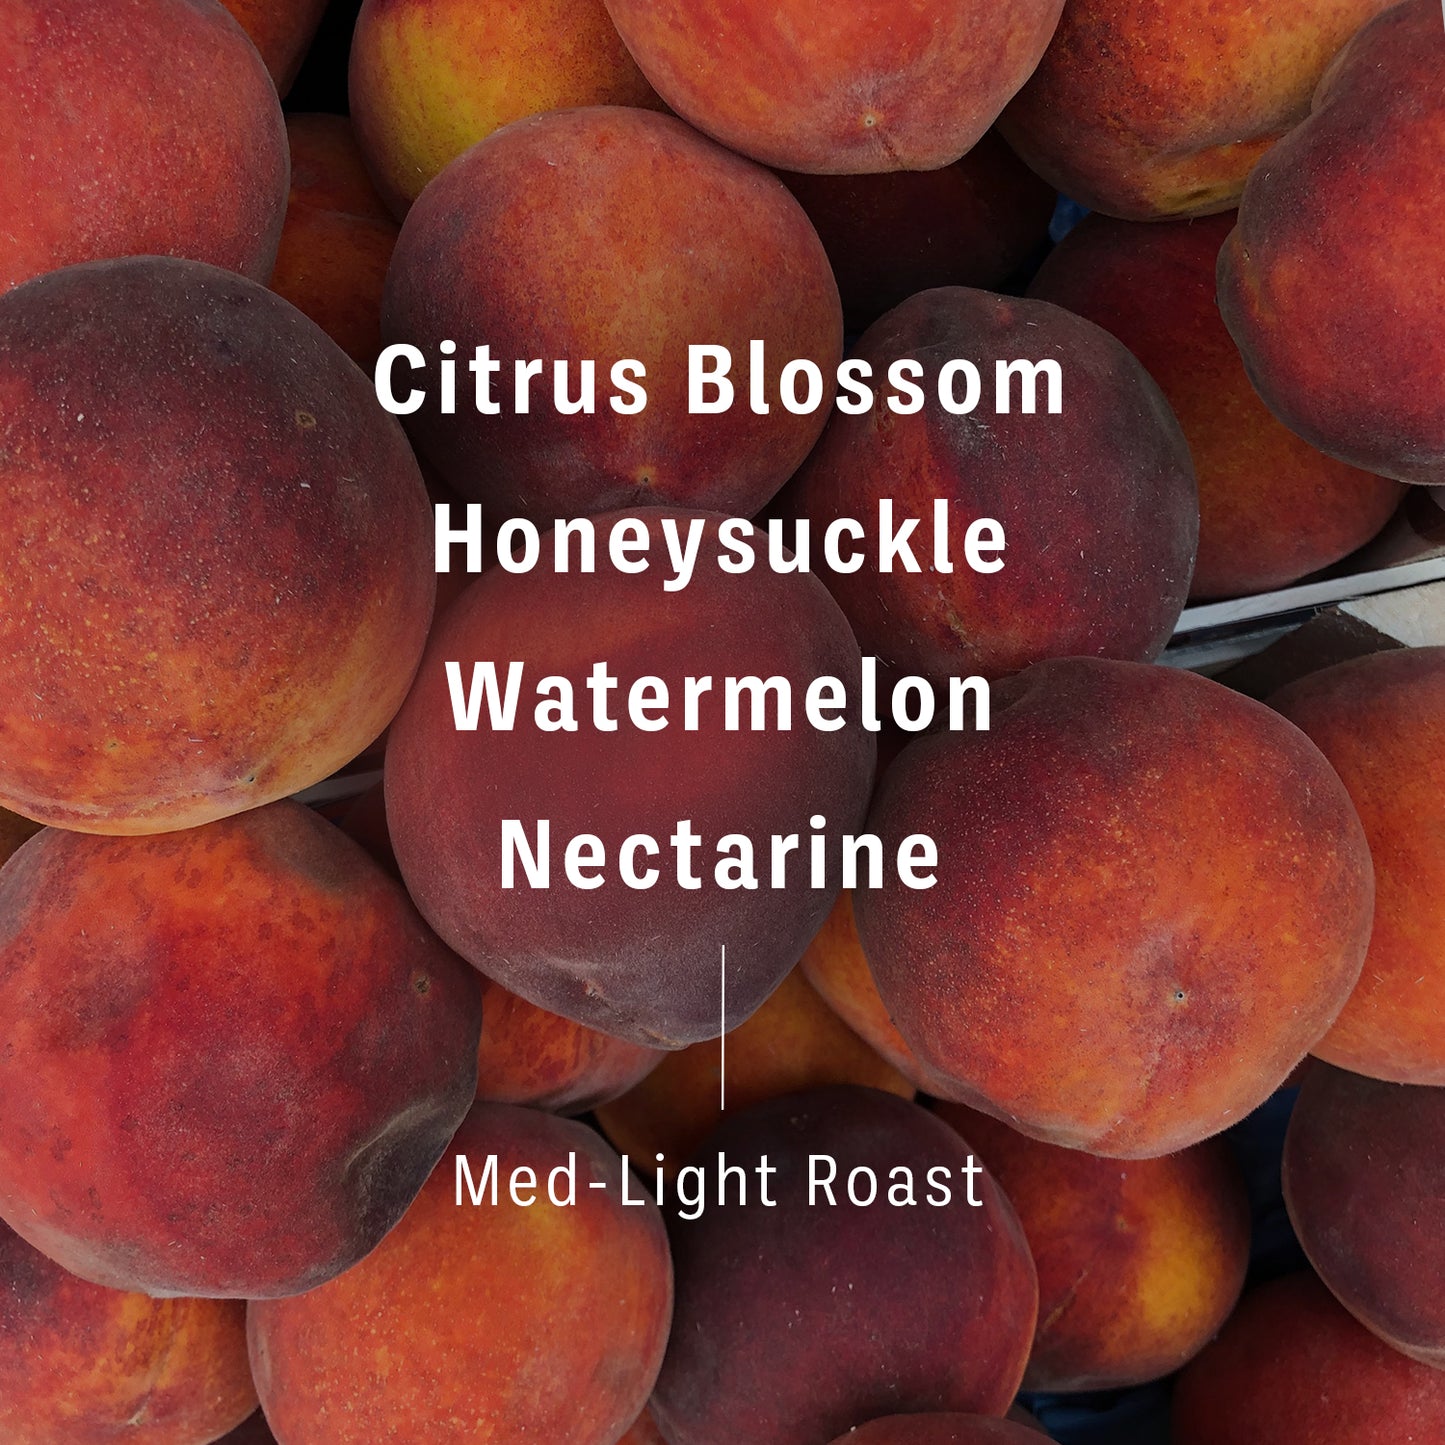 Flavor notes and roast level of Ethiopia Ginjo coffee beans imposed on background of nectarines. Text reads, “Citrus Blossom, Honeysuckle, Watermelon, Nectarine, Med-Light Roast” 2 of 4.